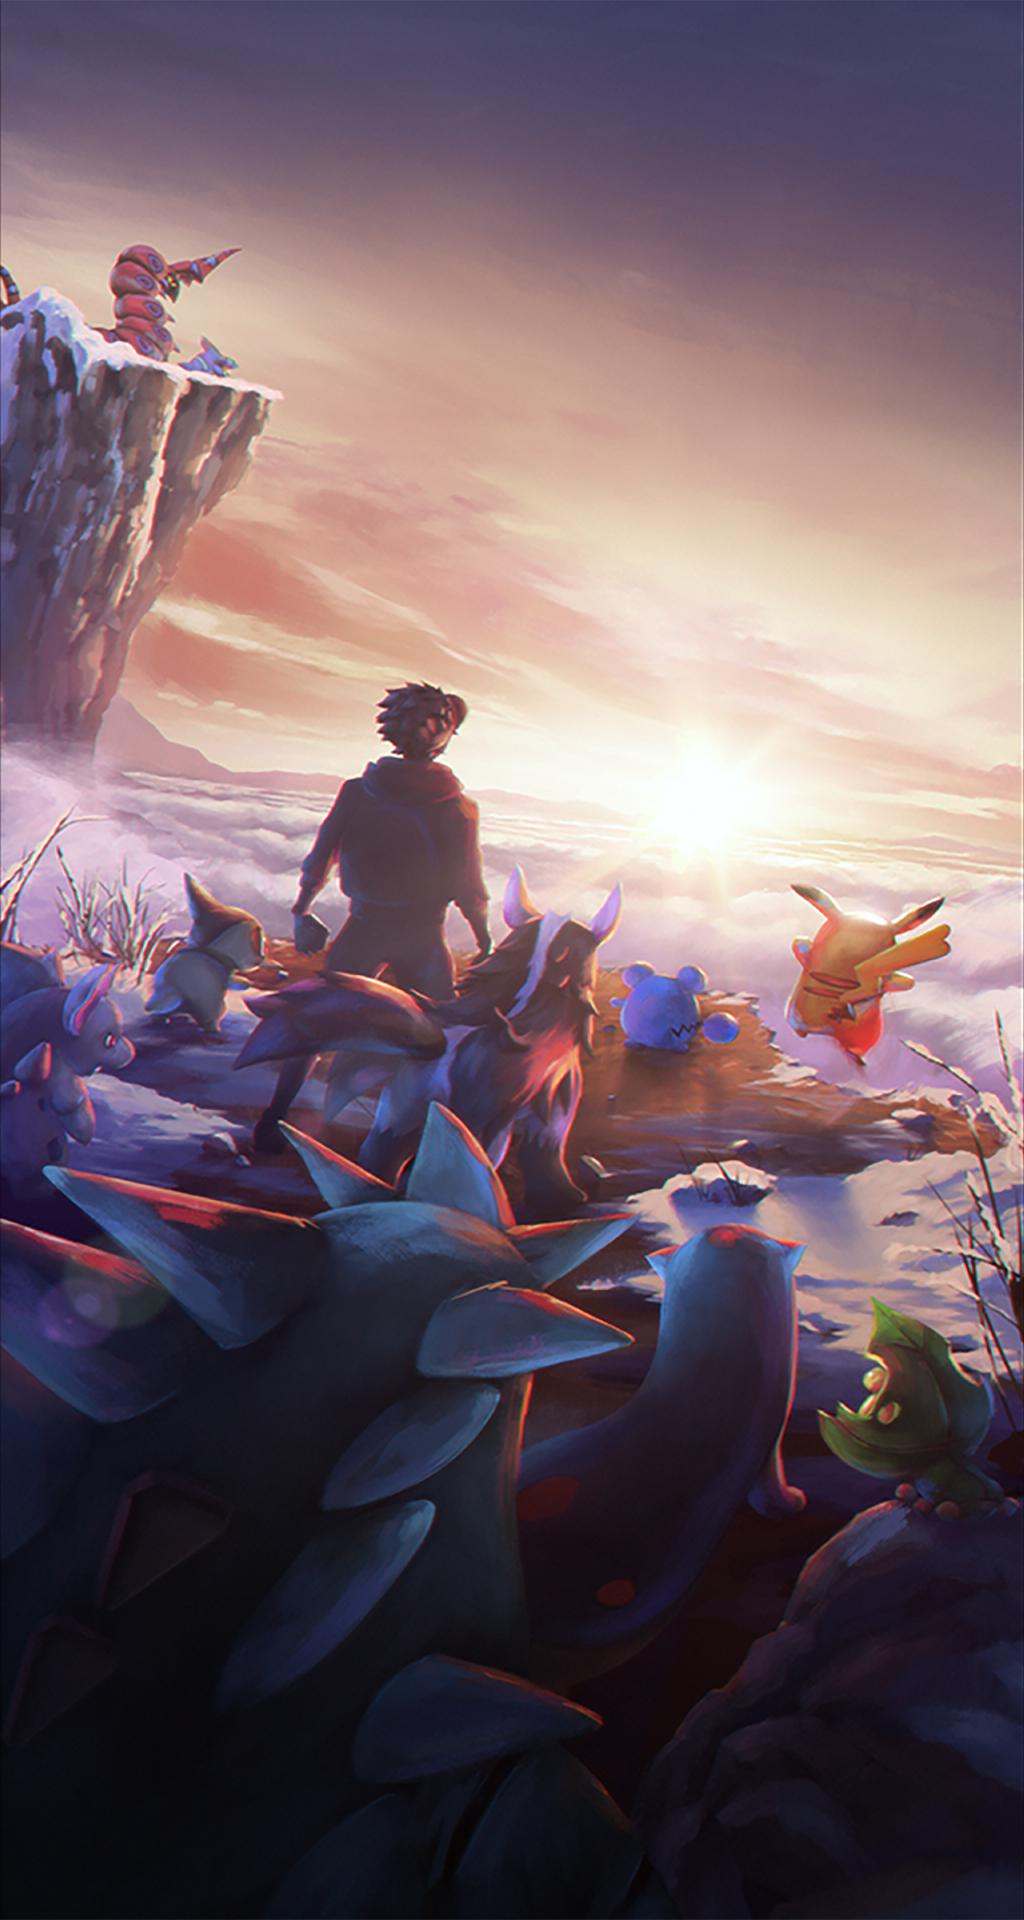 New Unova Themed Loading Screen Discovered By Data Miners